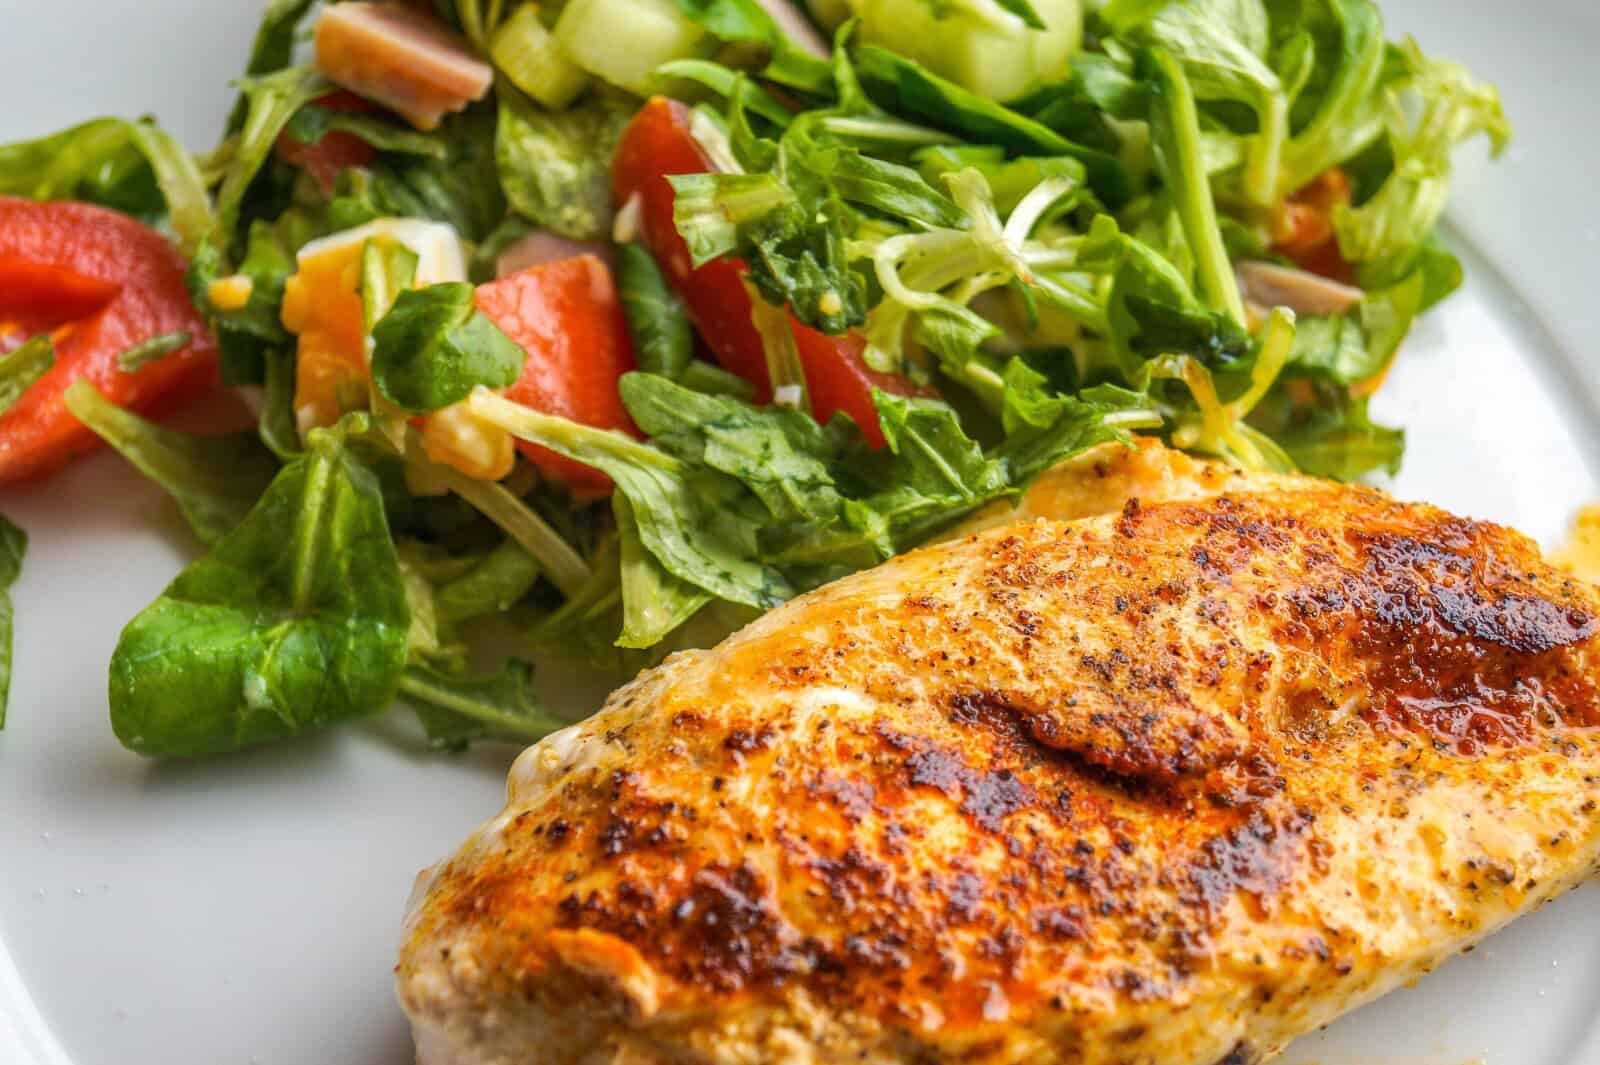 chicken breast next to a green salad on a white plate